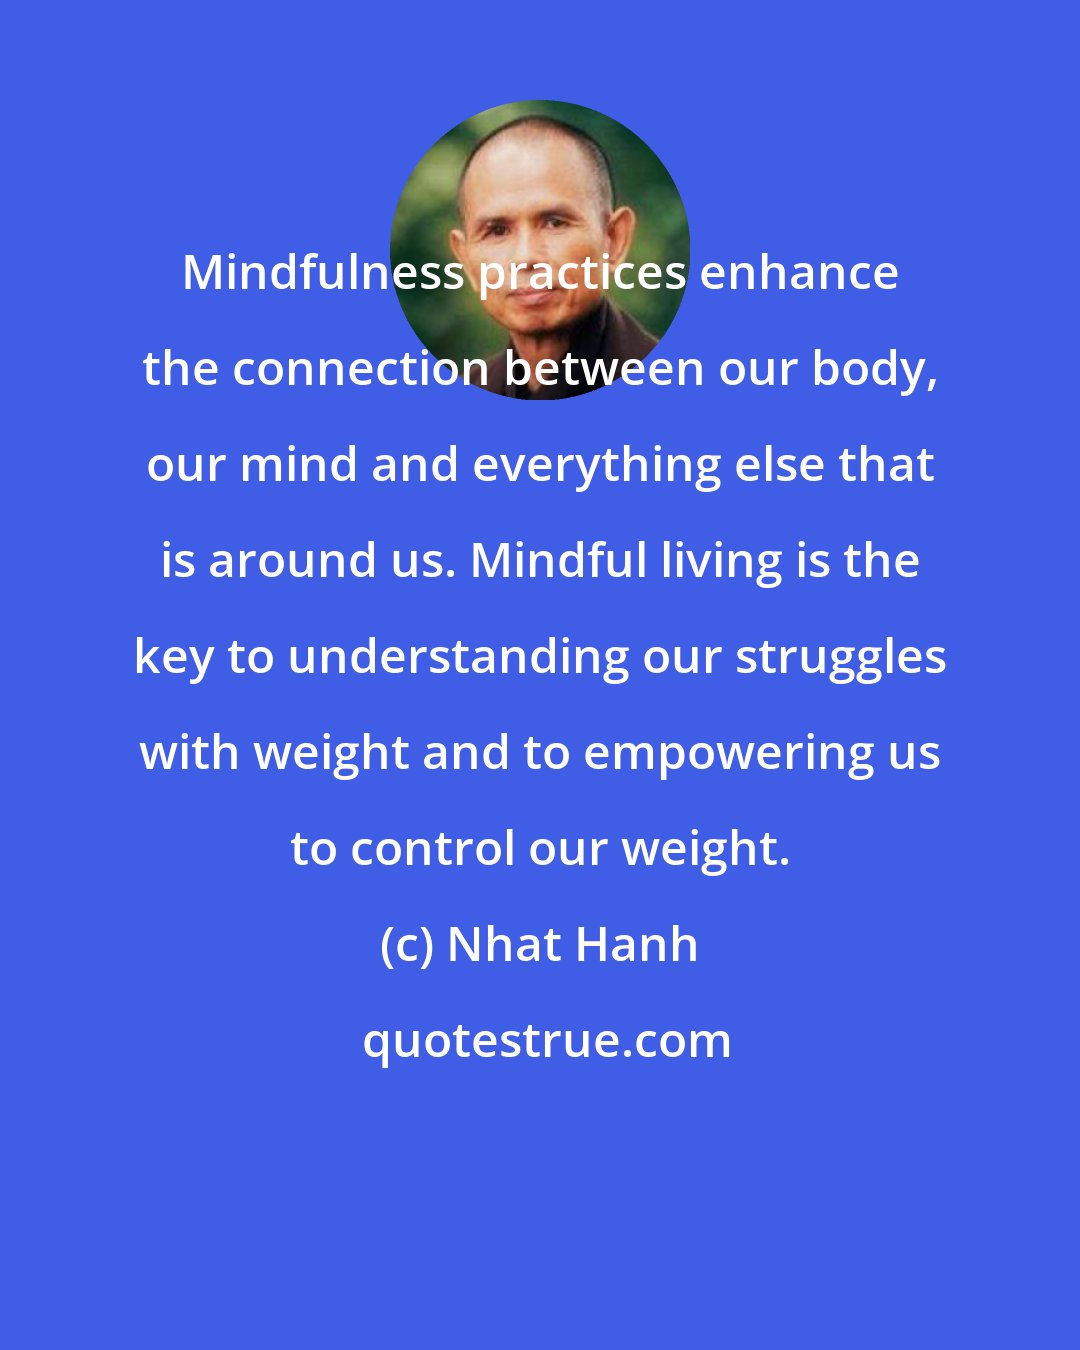 Nhat Hanh: Mindfulness practices enhance the connection between our body, our mind and everything else that is around us. Mindful living is the key to understanding our struggles with weight and to empowering us to control our weight.